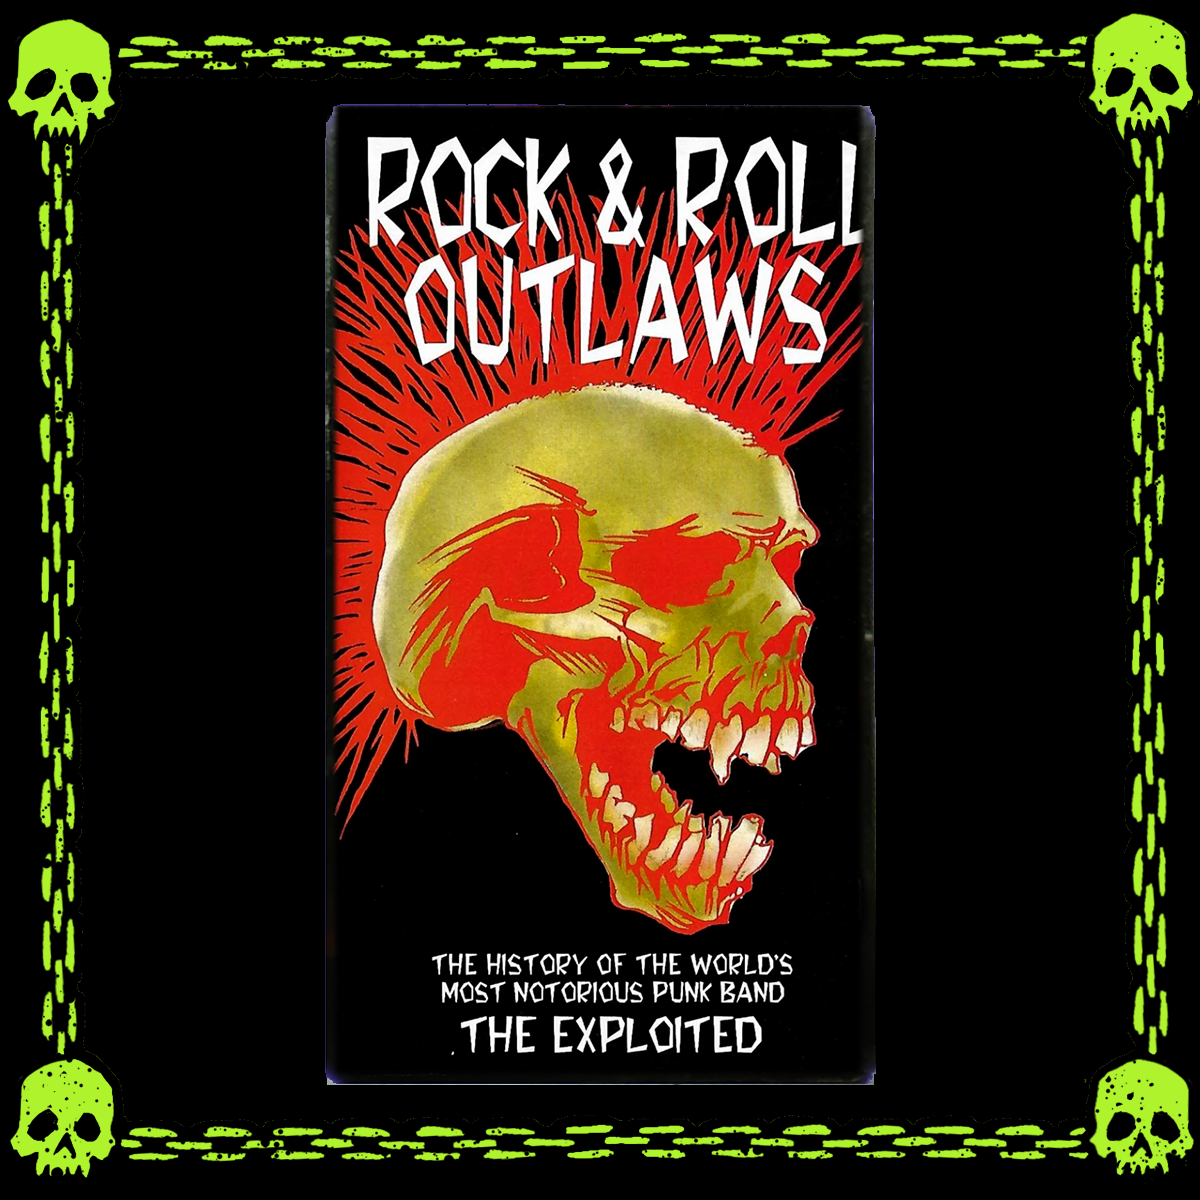 THE EXPLOITED - ROCK & ROLL OUTLAWS VHS